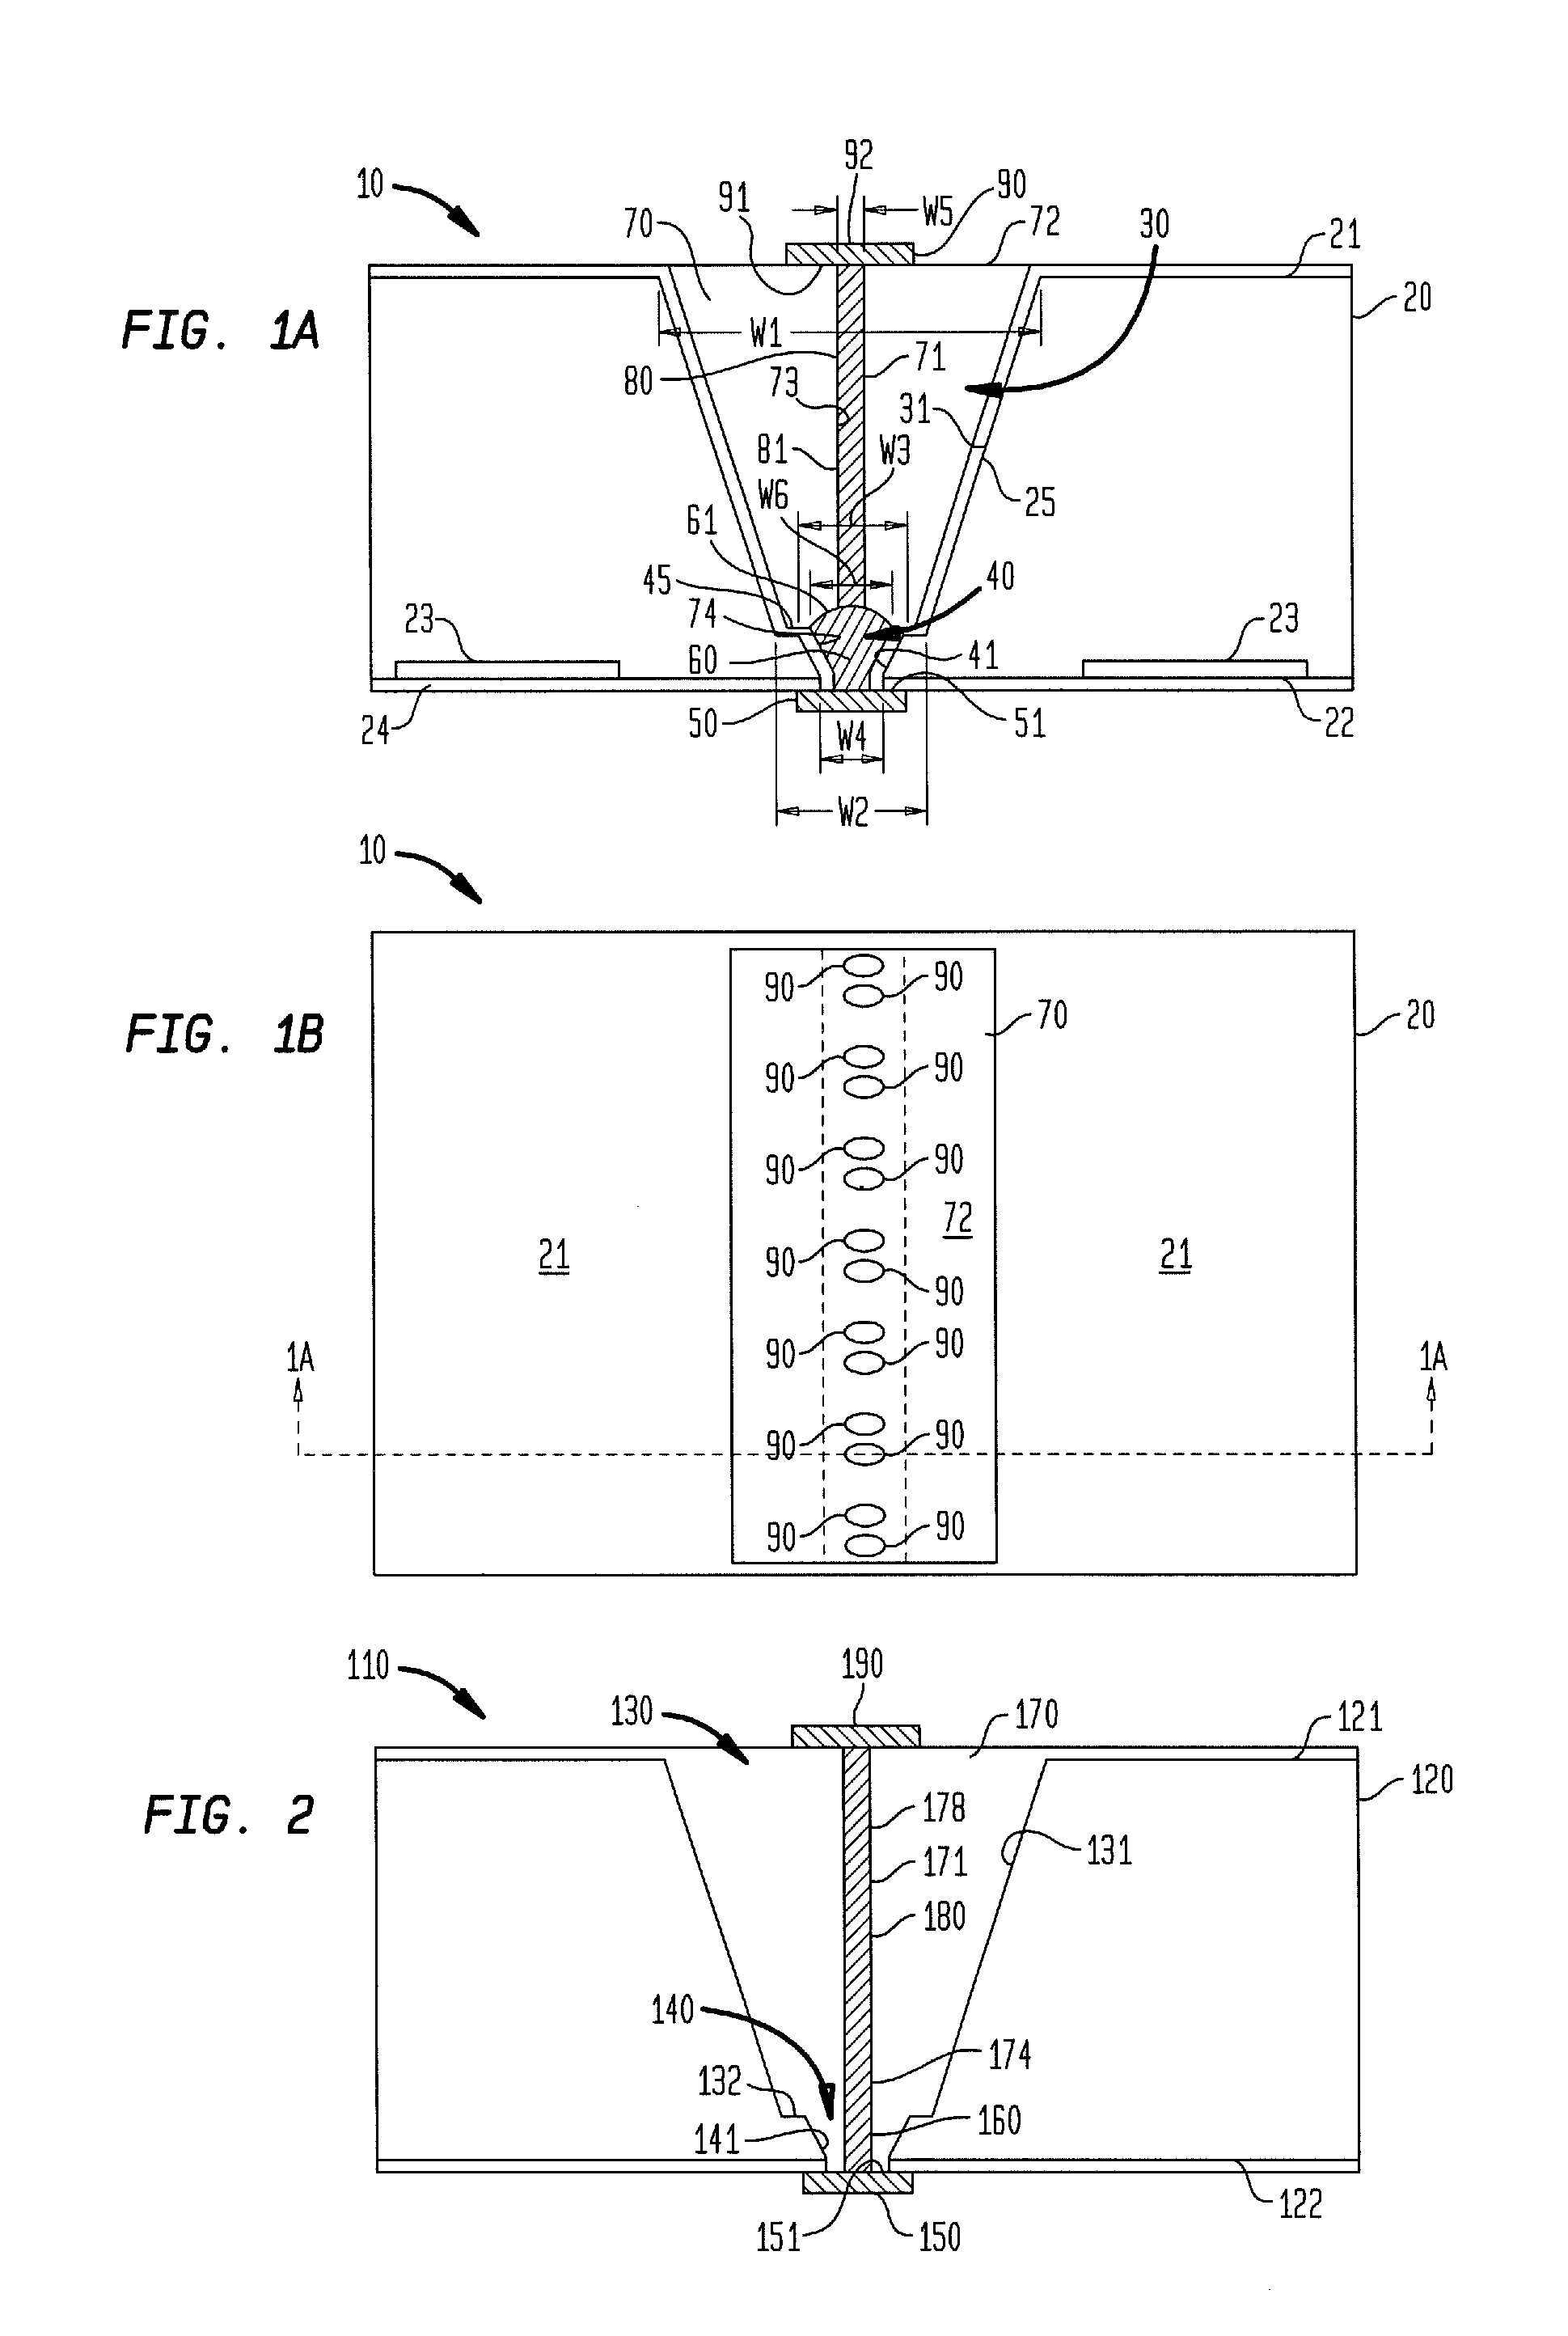 Methods of forming semiconductor elements using micro-abrasive particle stream